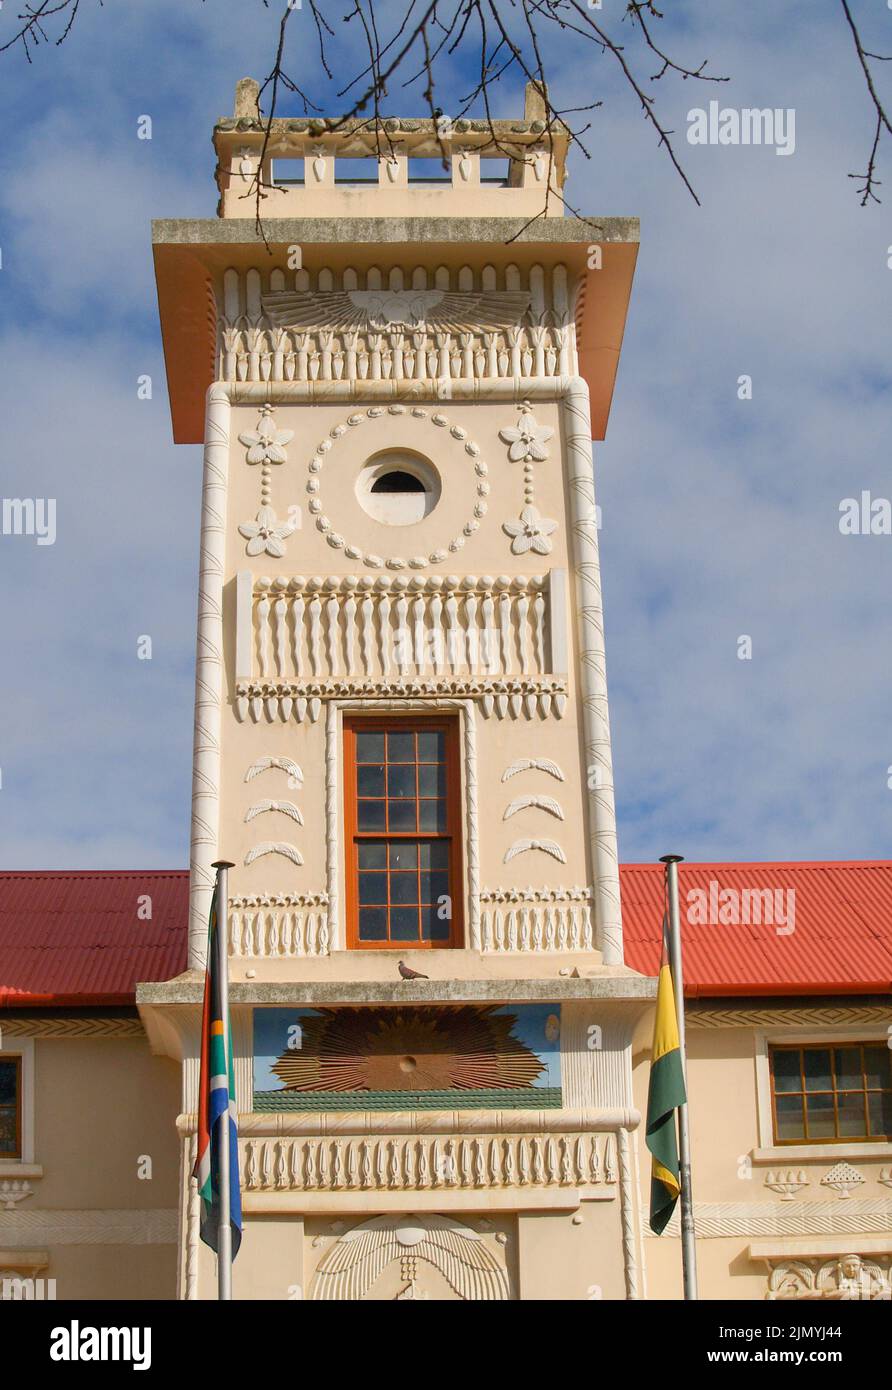 Ornate building tower in traditional architectural style Stock Photo